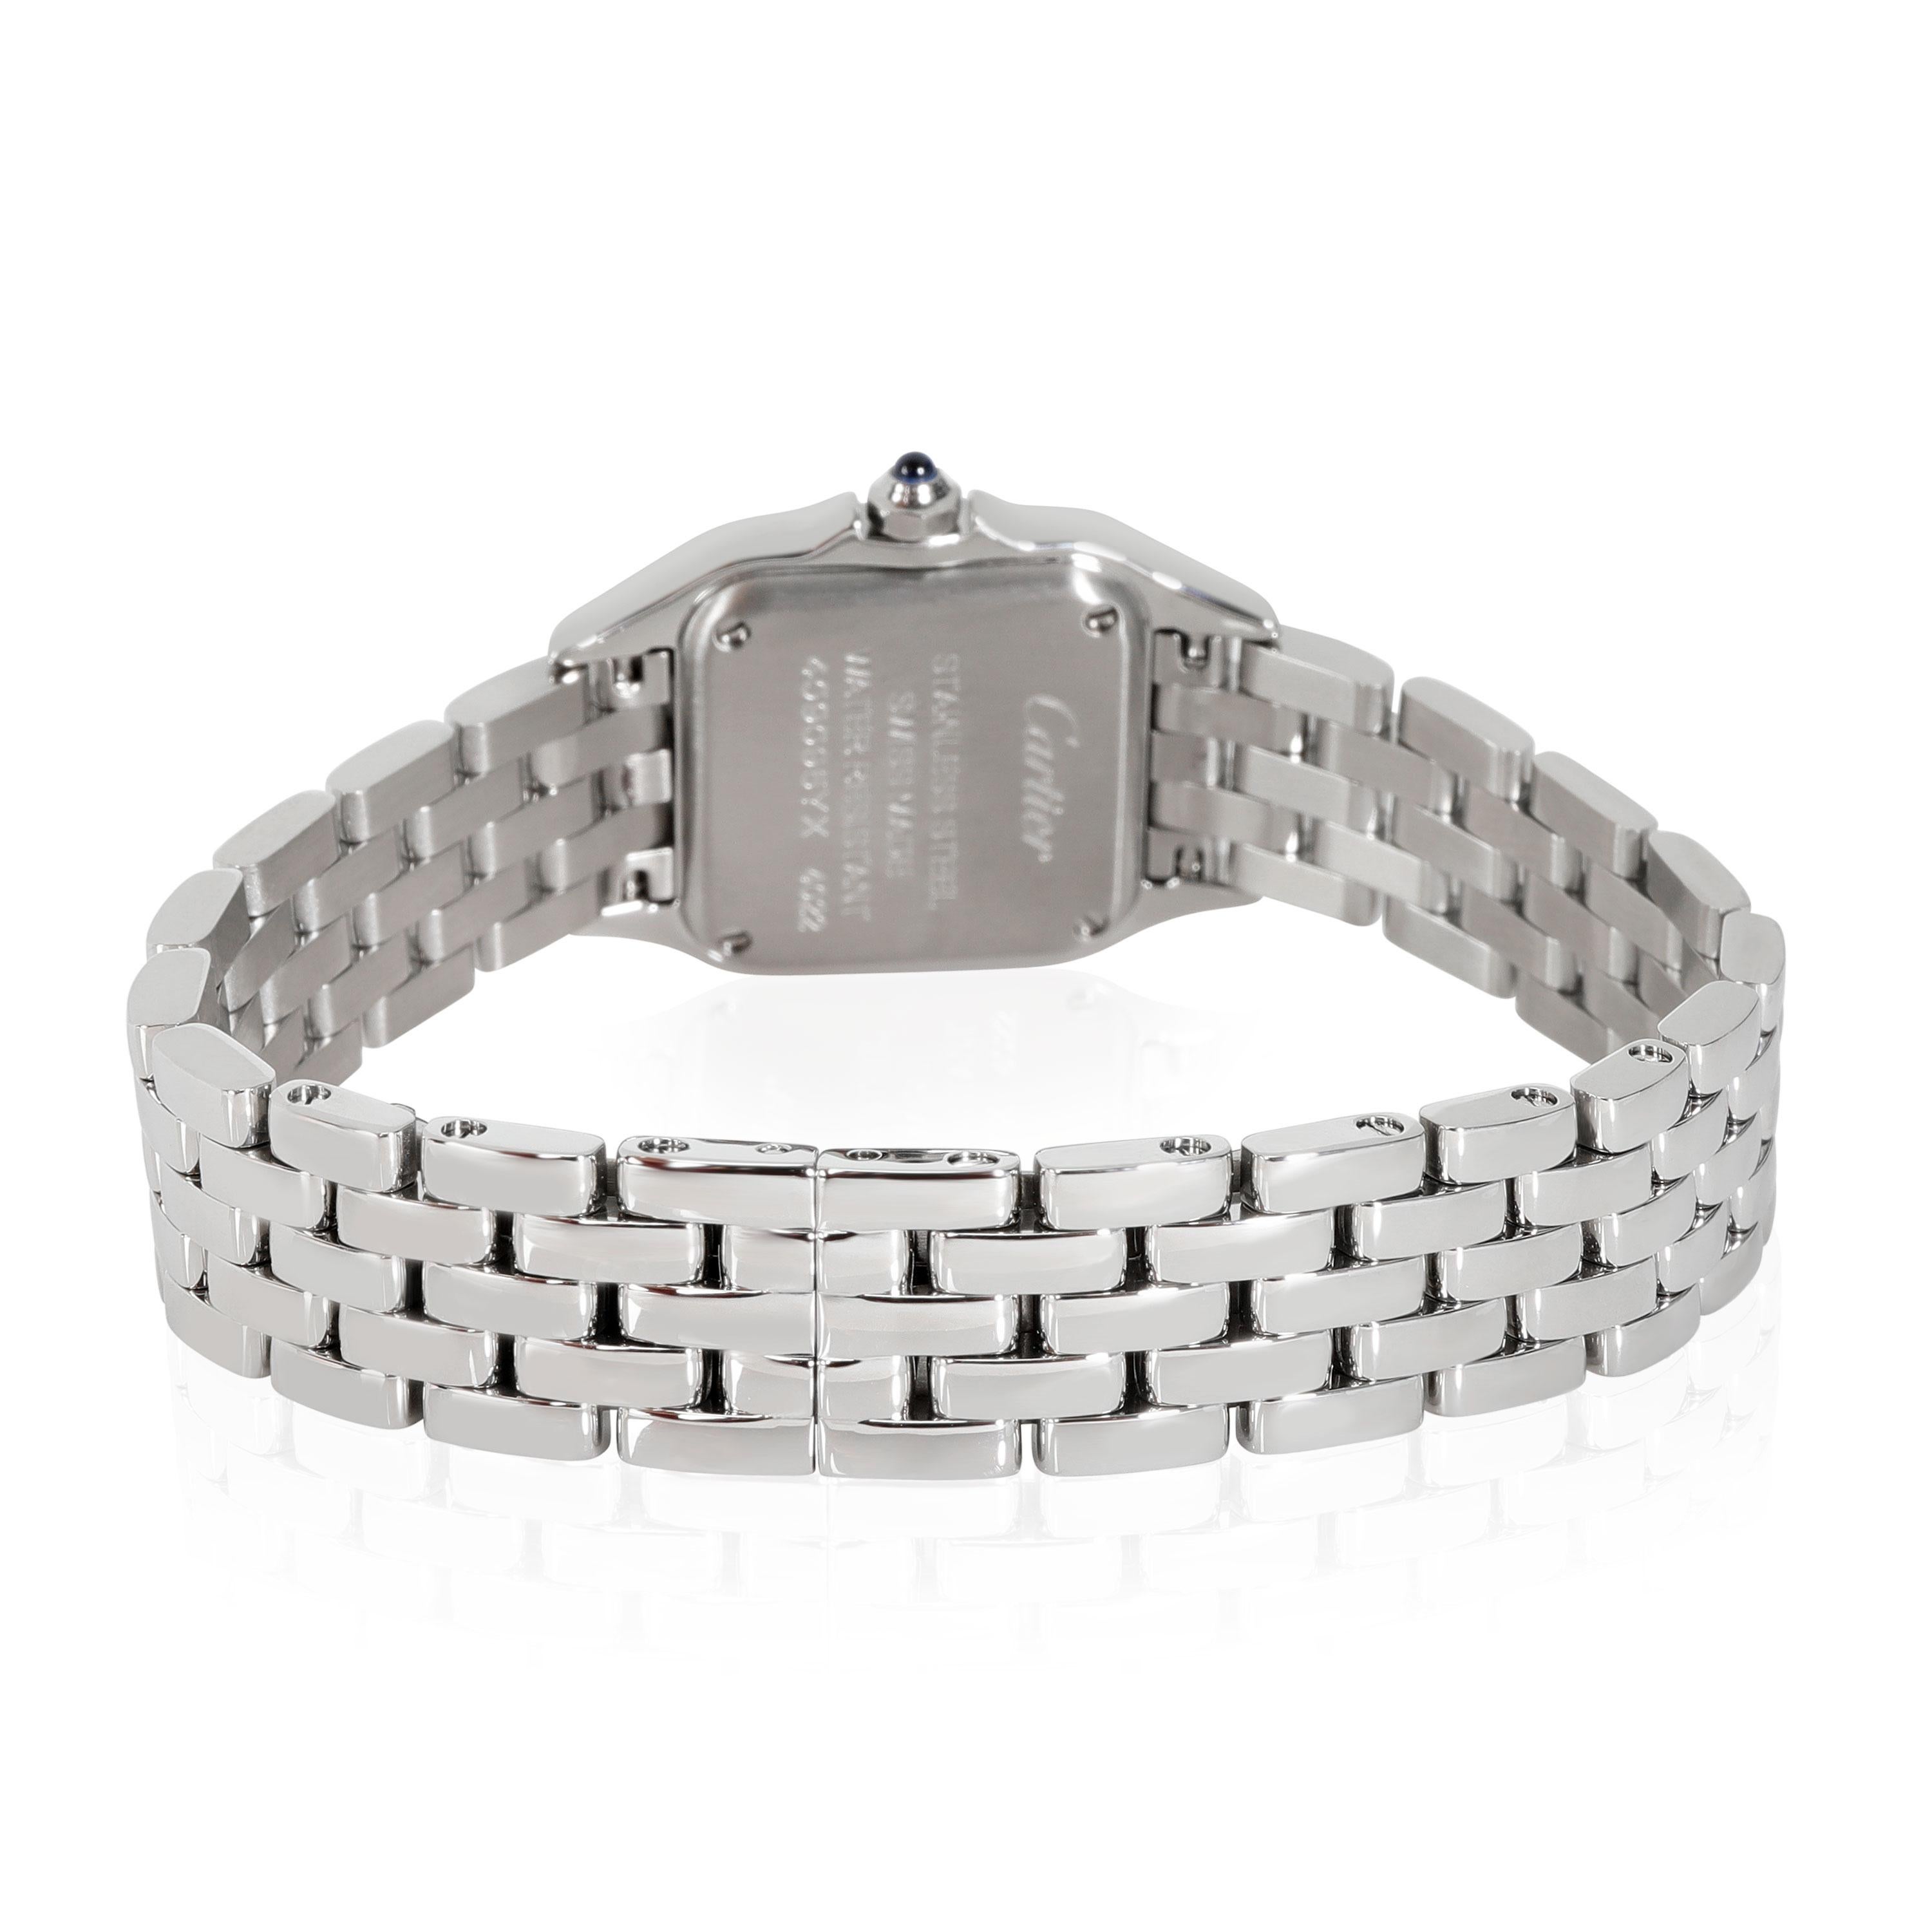 
Cartier Panthere W4PN0007 Women's Watch in Stainless Steel

SKU: 112874

PRIMARY DETAILS
Brand:  Cartier
Model: Panthere
Country of Origin: Switzerland
Movement Type: Quartz: Battery
Year Manufactured: 2019
Year of Manufacture: 2010-2019
Condition: